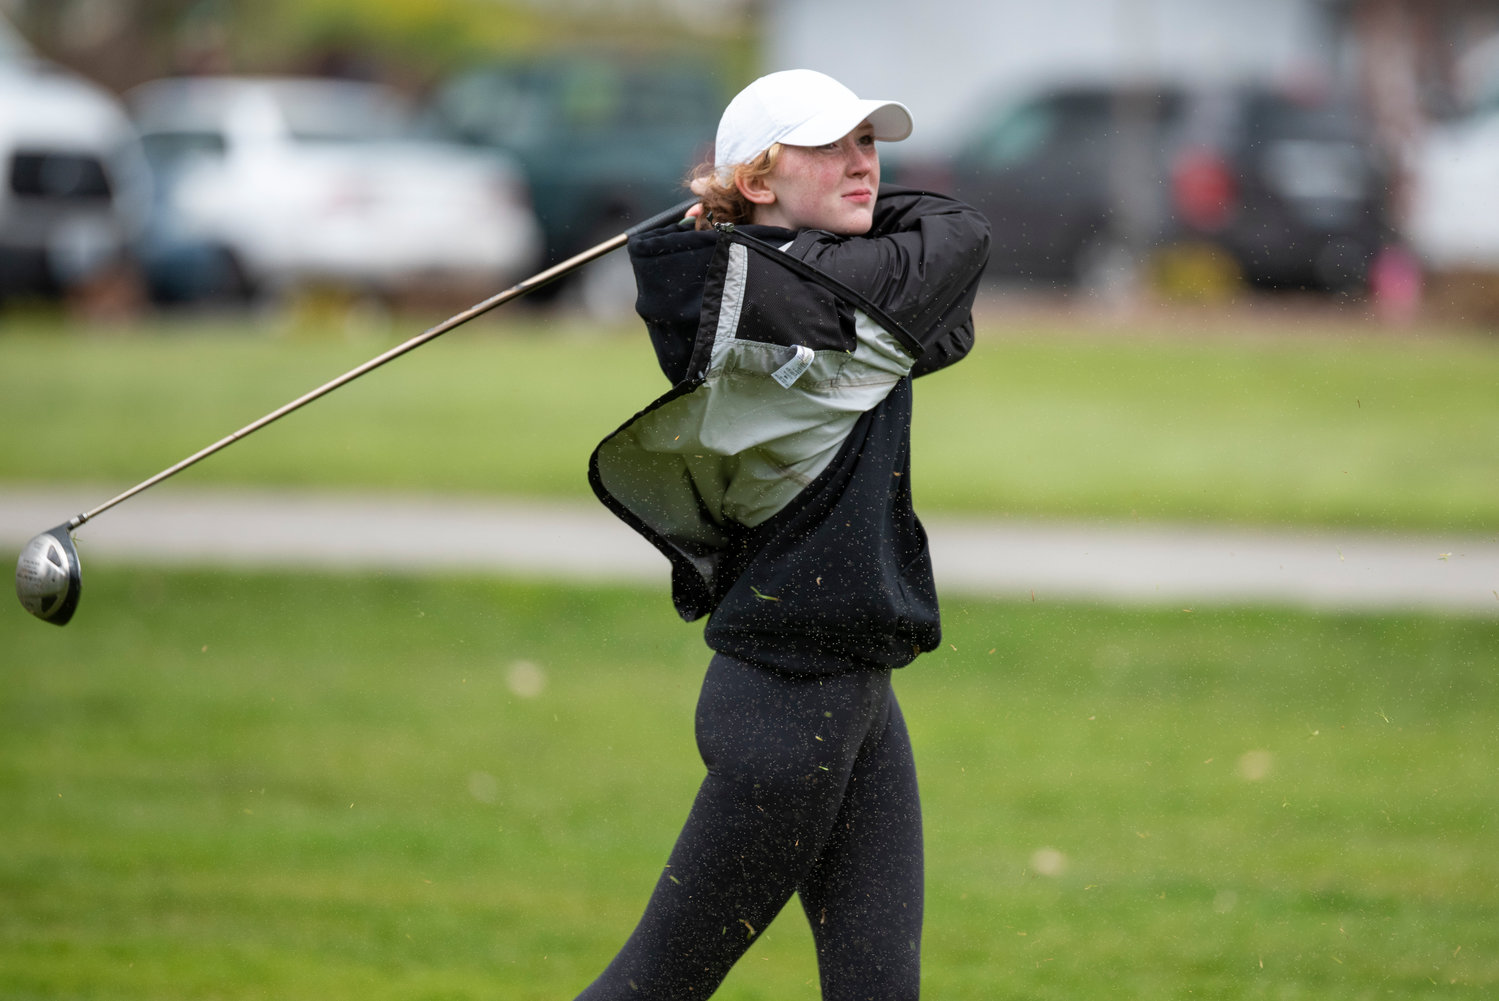 Centralia's Sam Johnston tees off during a league match against W.F. West at Newaukum Valley Golf Course on April 13.